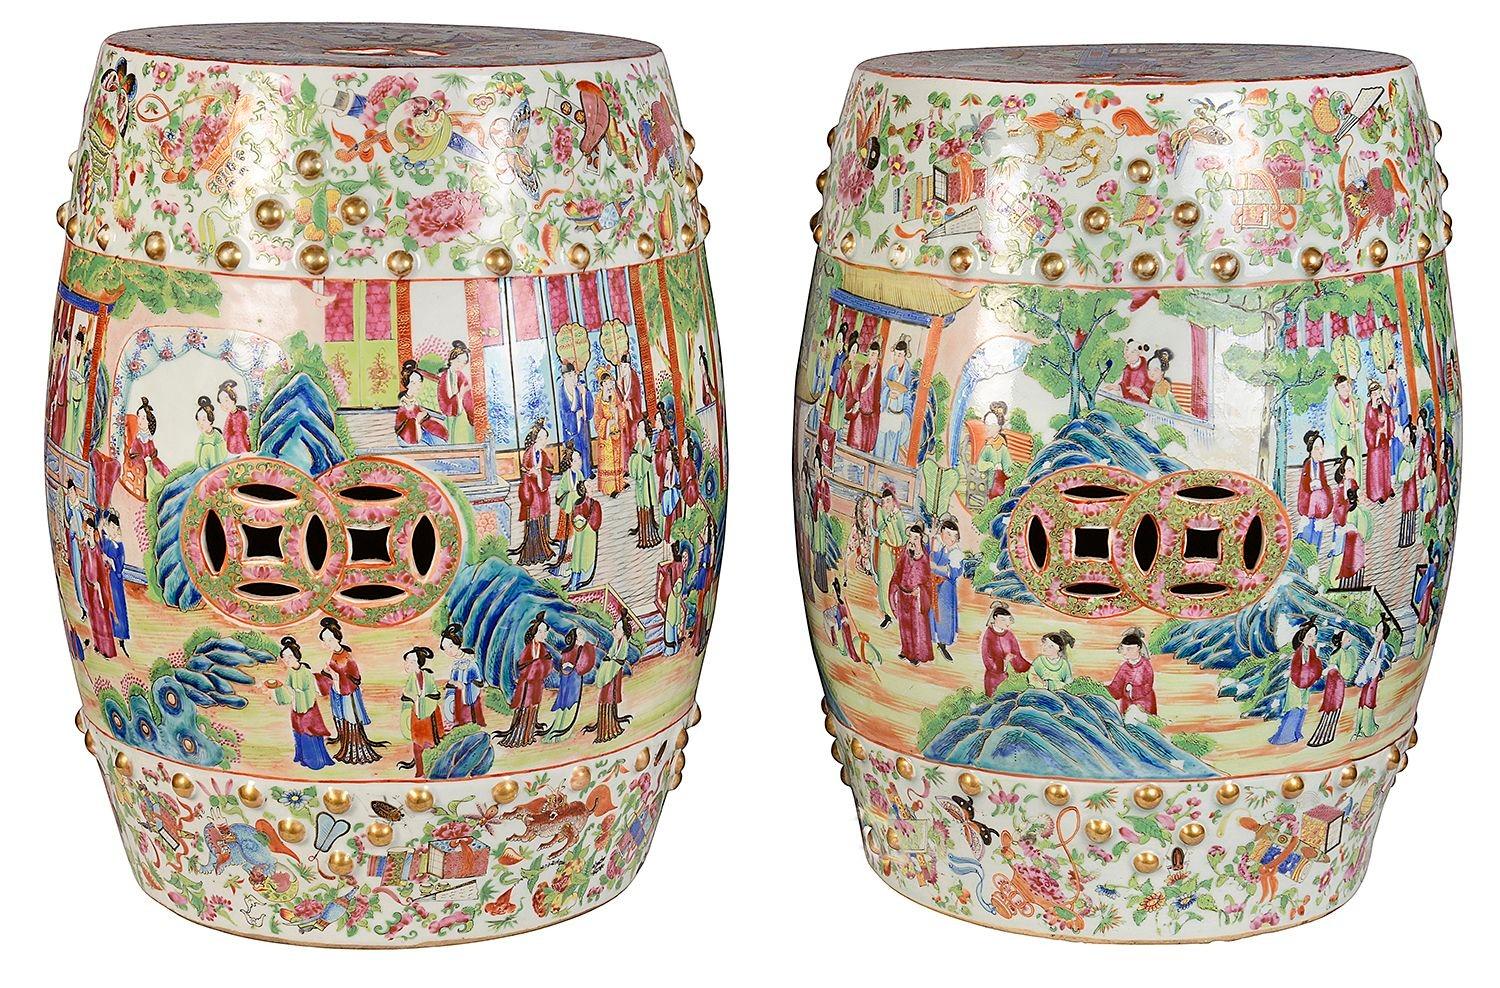 A wonderful quality pair of 19th Century Chinese Rose medallion / Cantonese porcelain garden seats. Each with beautiful bold classical green and pink colouring. Depicting scenes of various male and female couriers roaming around the gardens of a